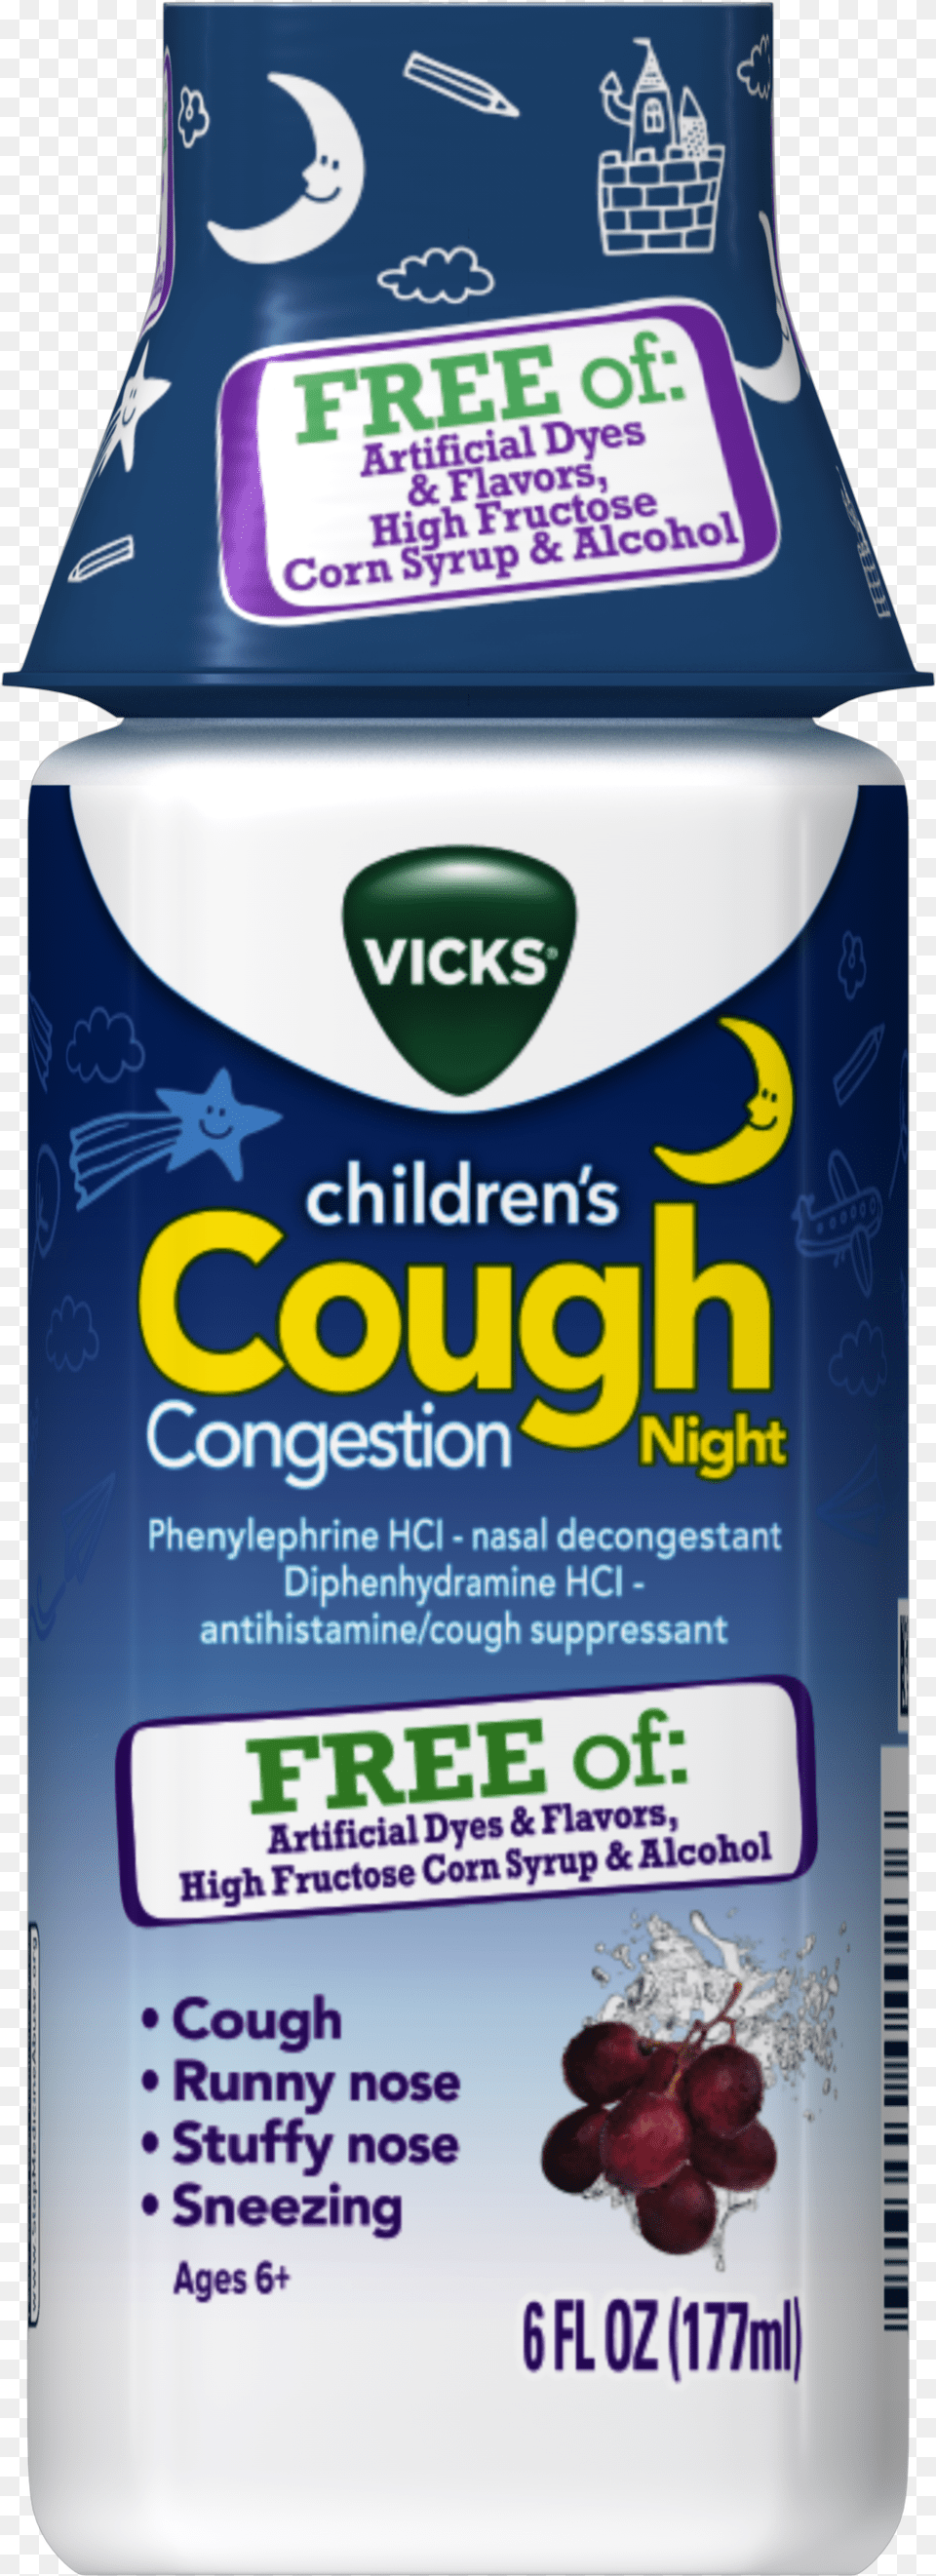 Vicks Children39s Cough Congestion, Food, Ketchup, Herbal, Herbs Png